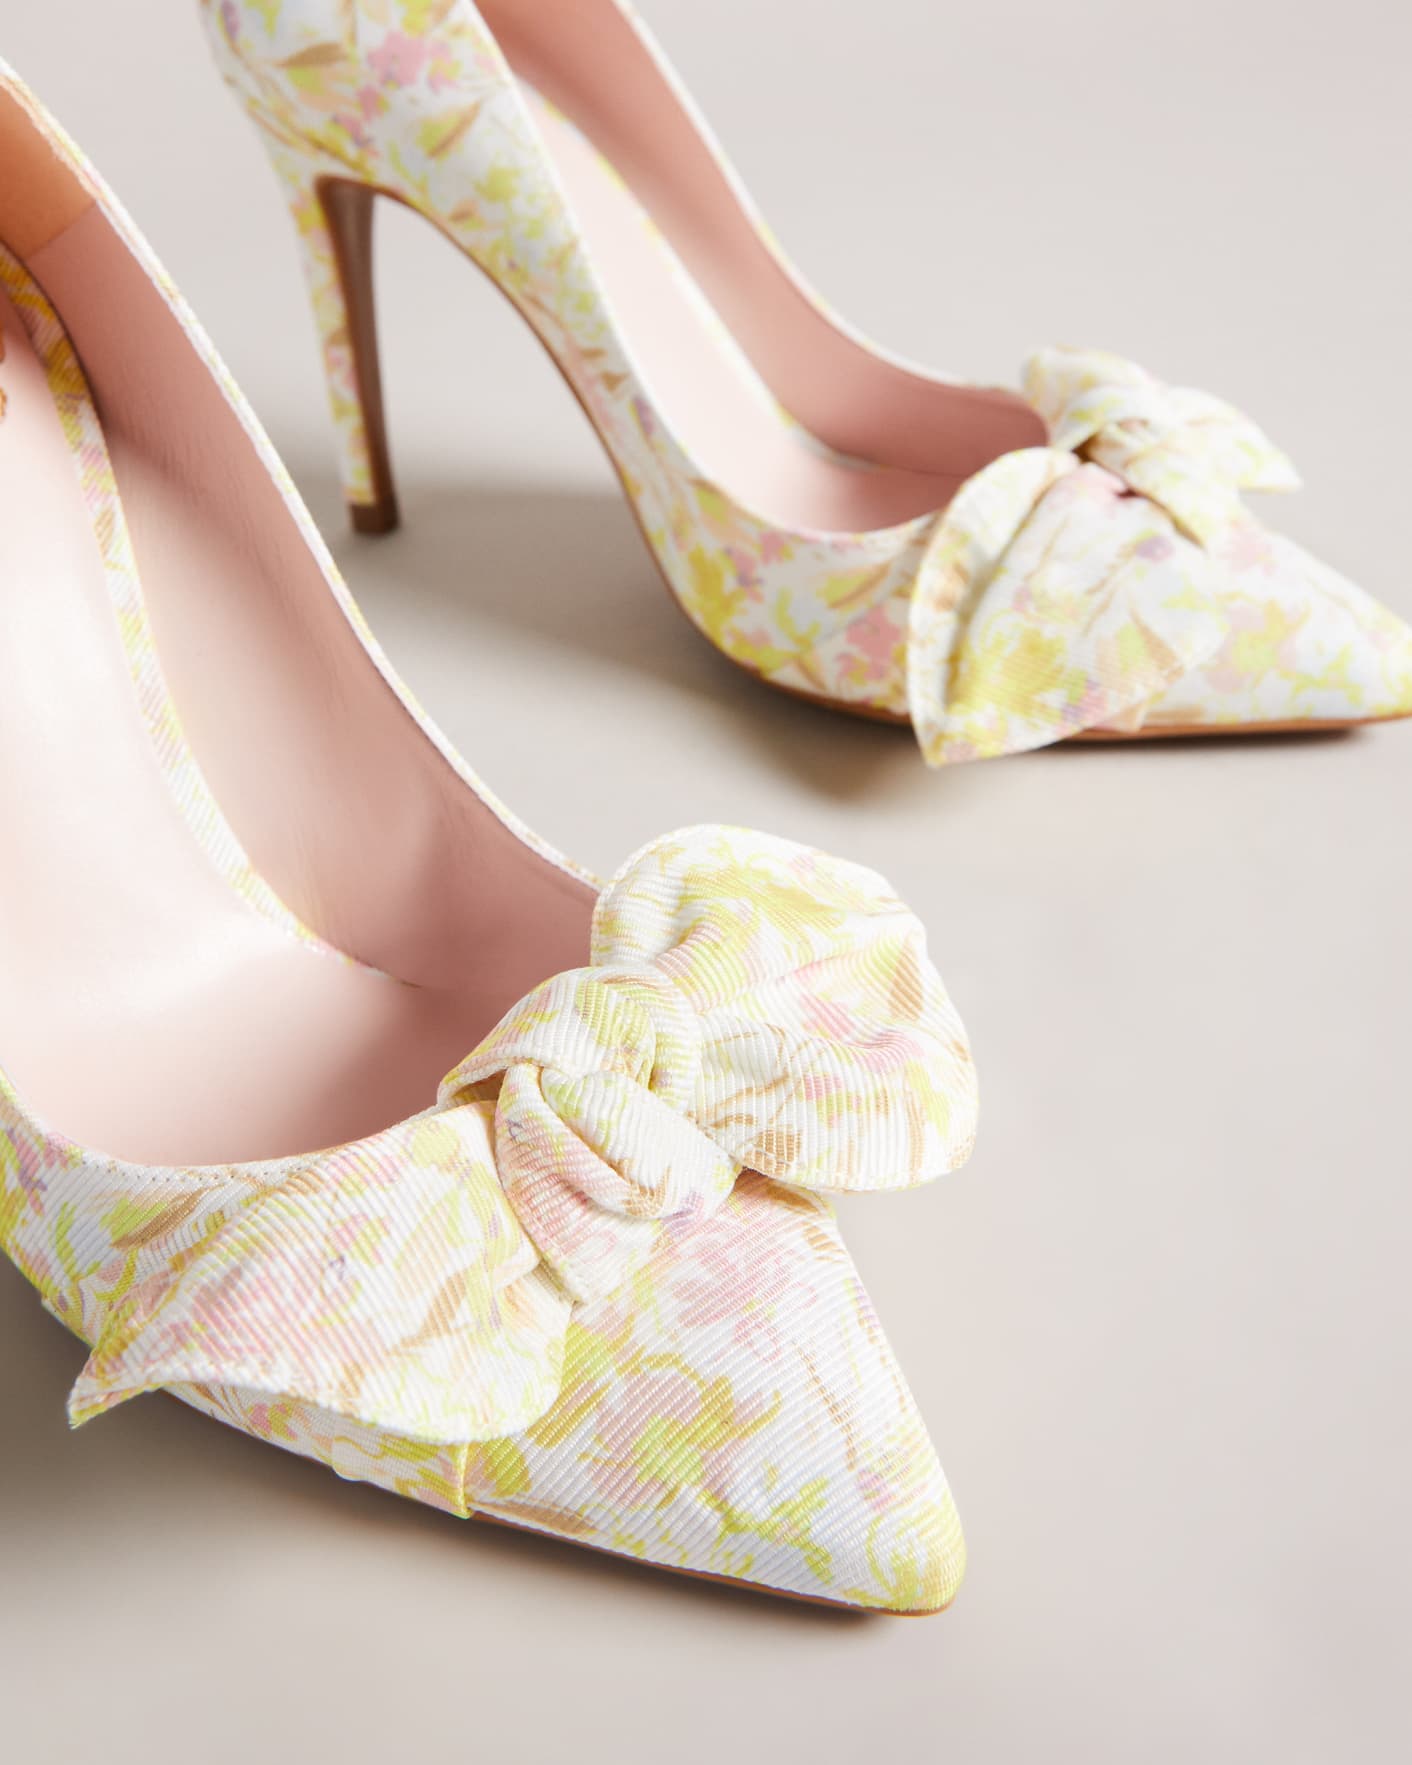 Medium Yellow Sketchy Magnolia 100mm Bow Court Shoe Ted Baker